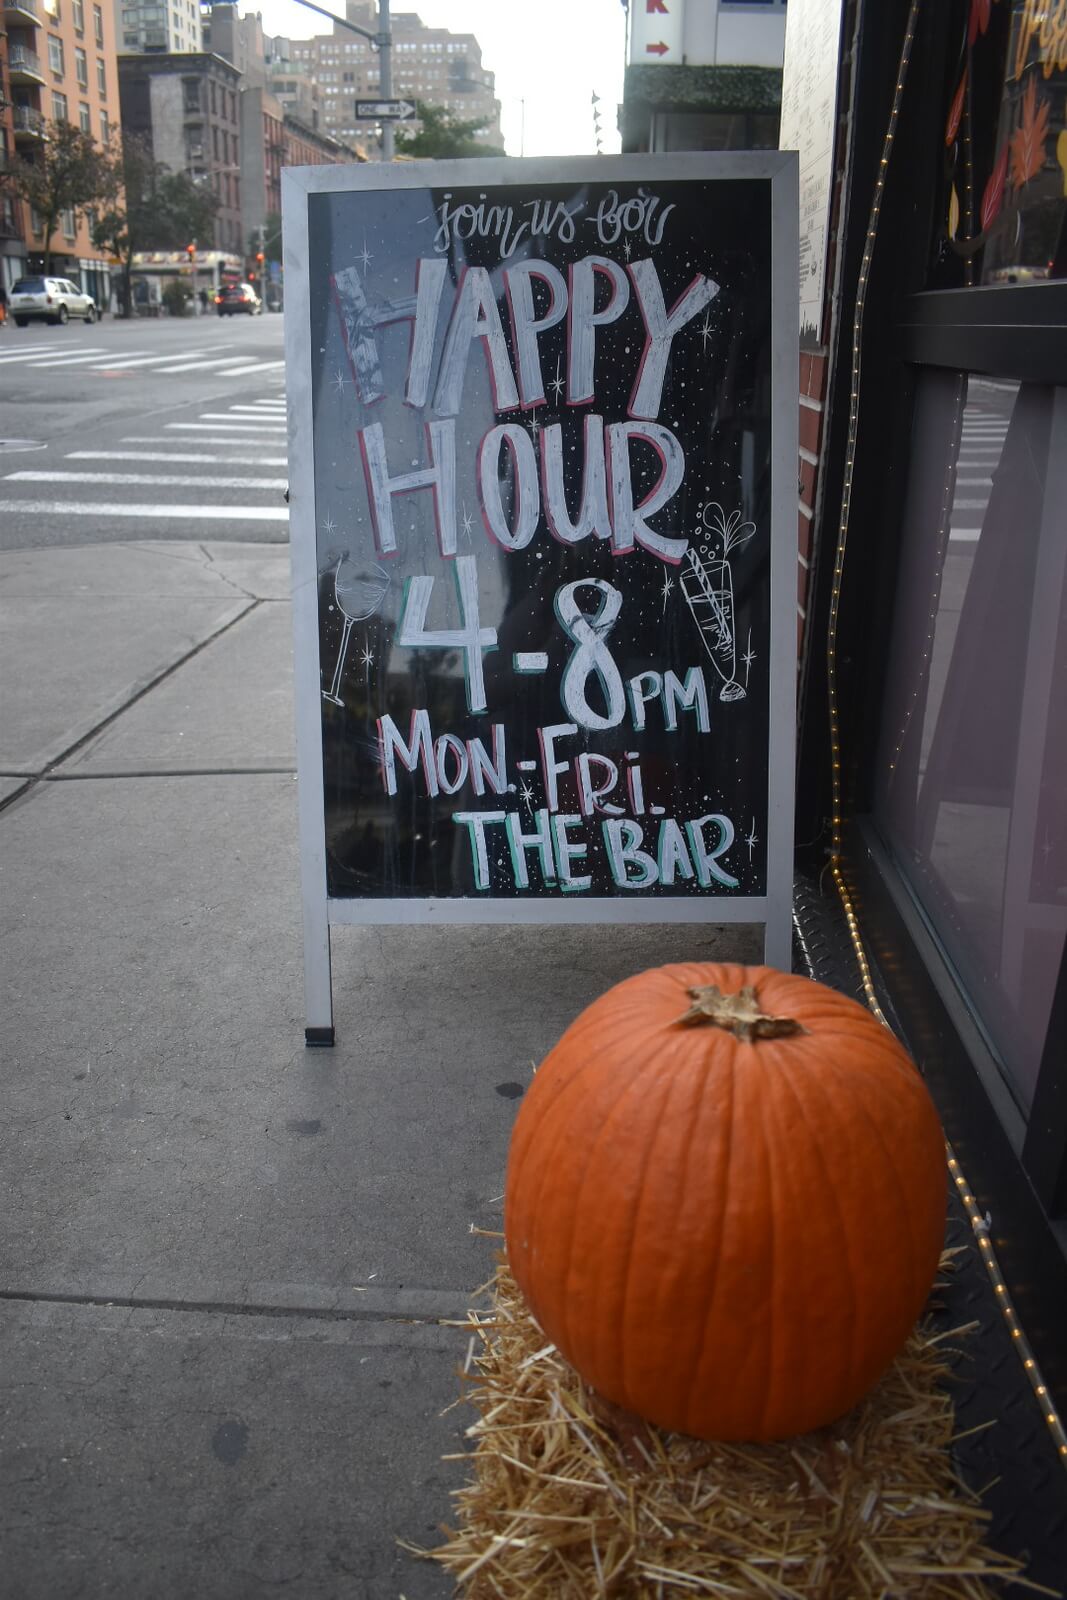 Sidewalk sign that says 'Happy Hour 4-8pm Mon-Fri' with a pumpkin in front of it